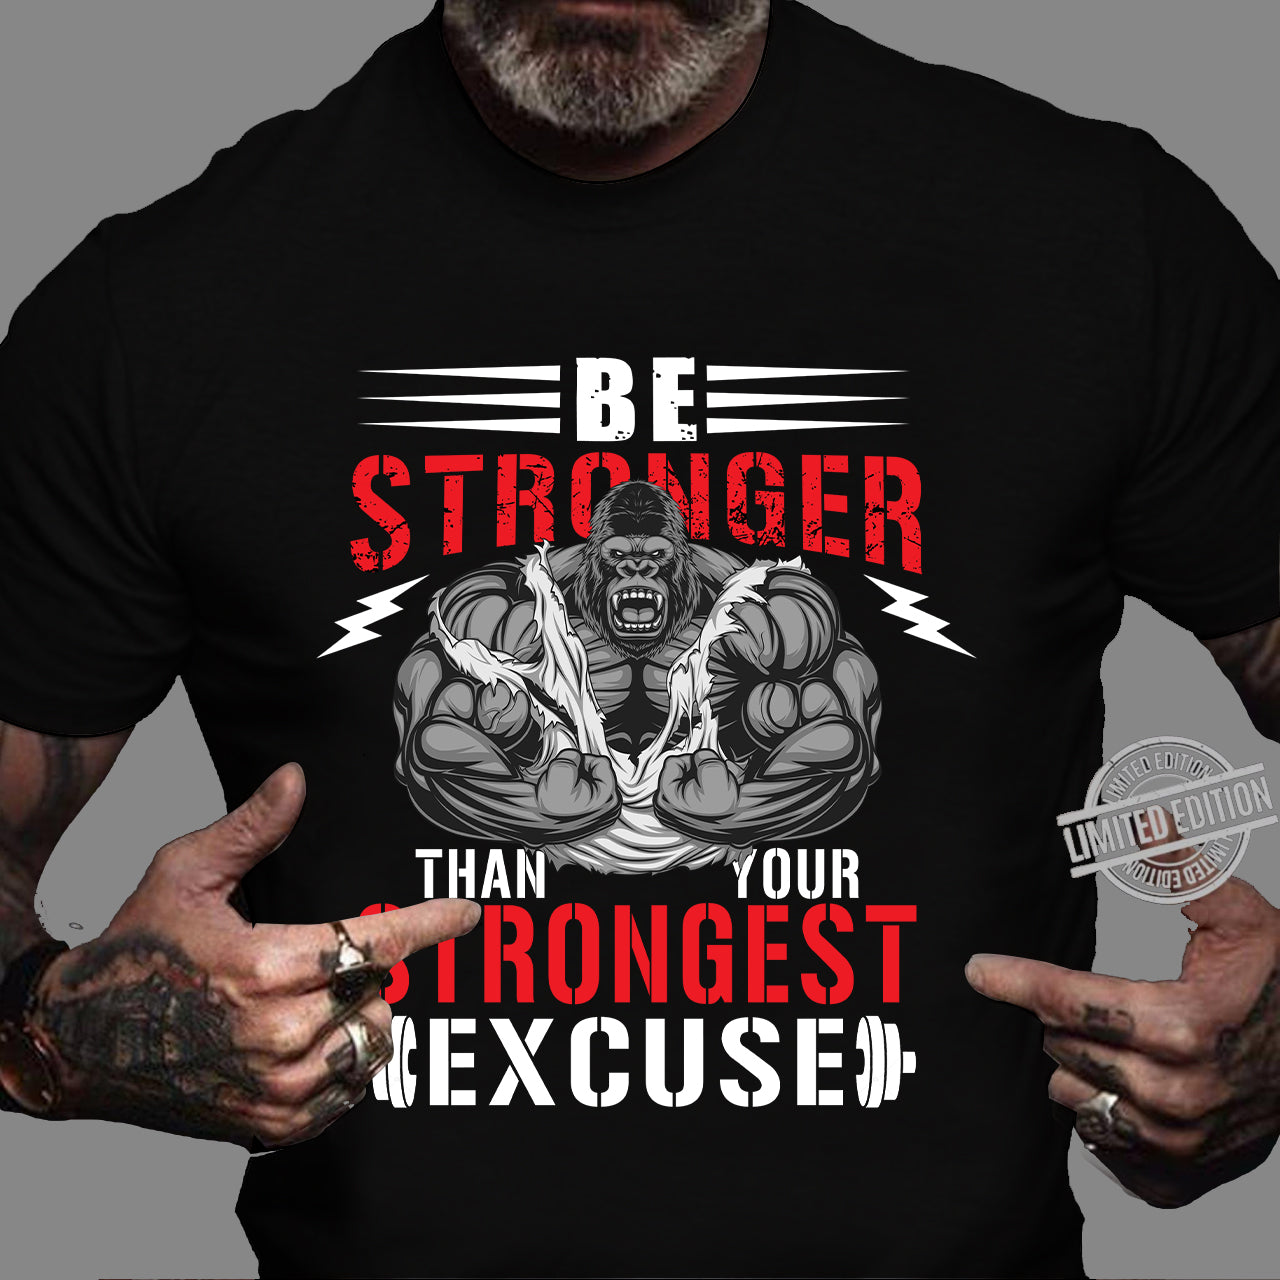 Gym Pump Cover T-shirt Muscle Gorilla Motivational Quotes Saying